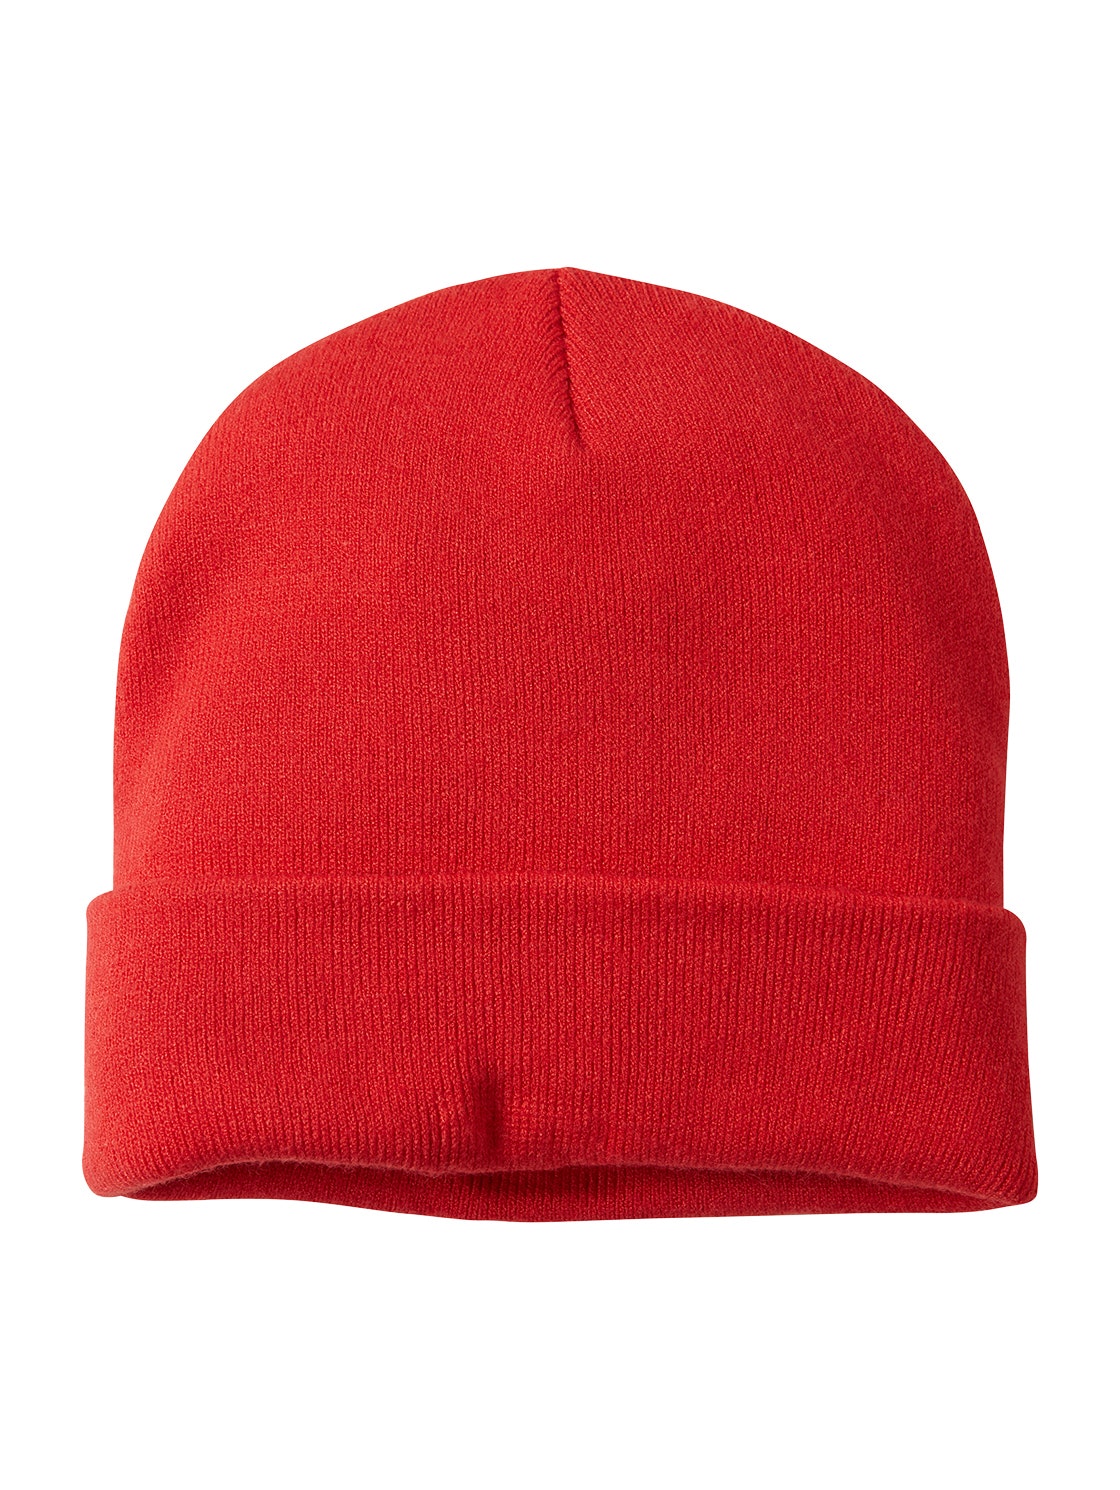 beanie, Scarlet Red                   Red